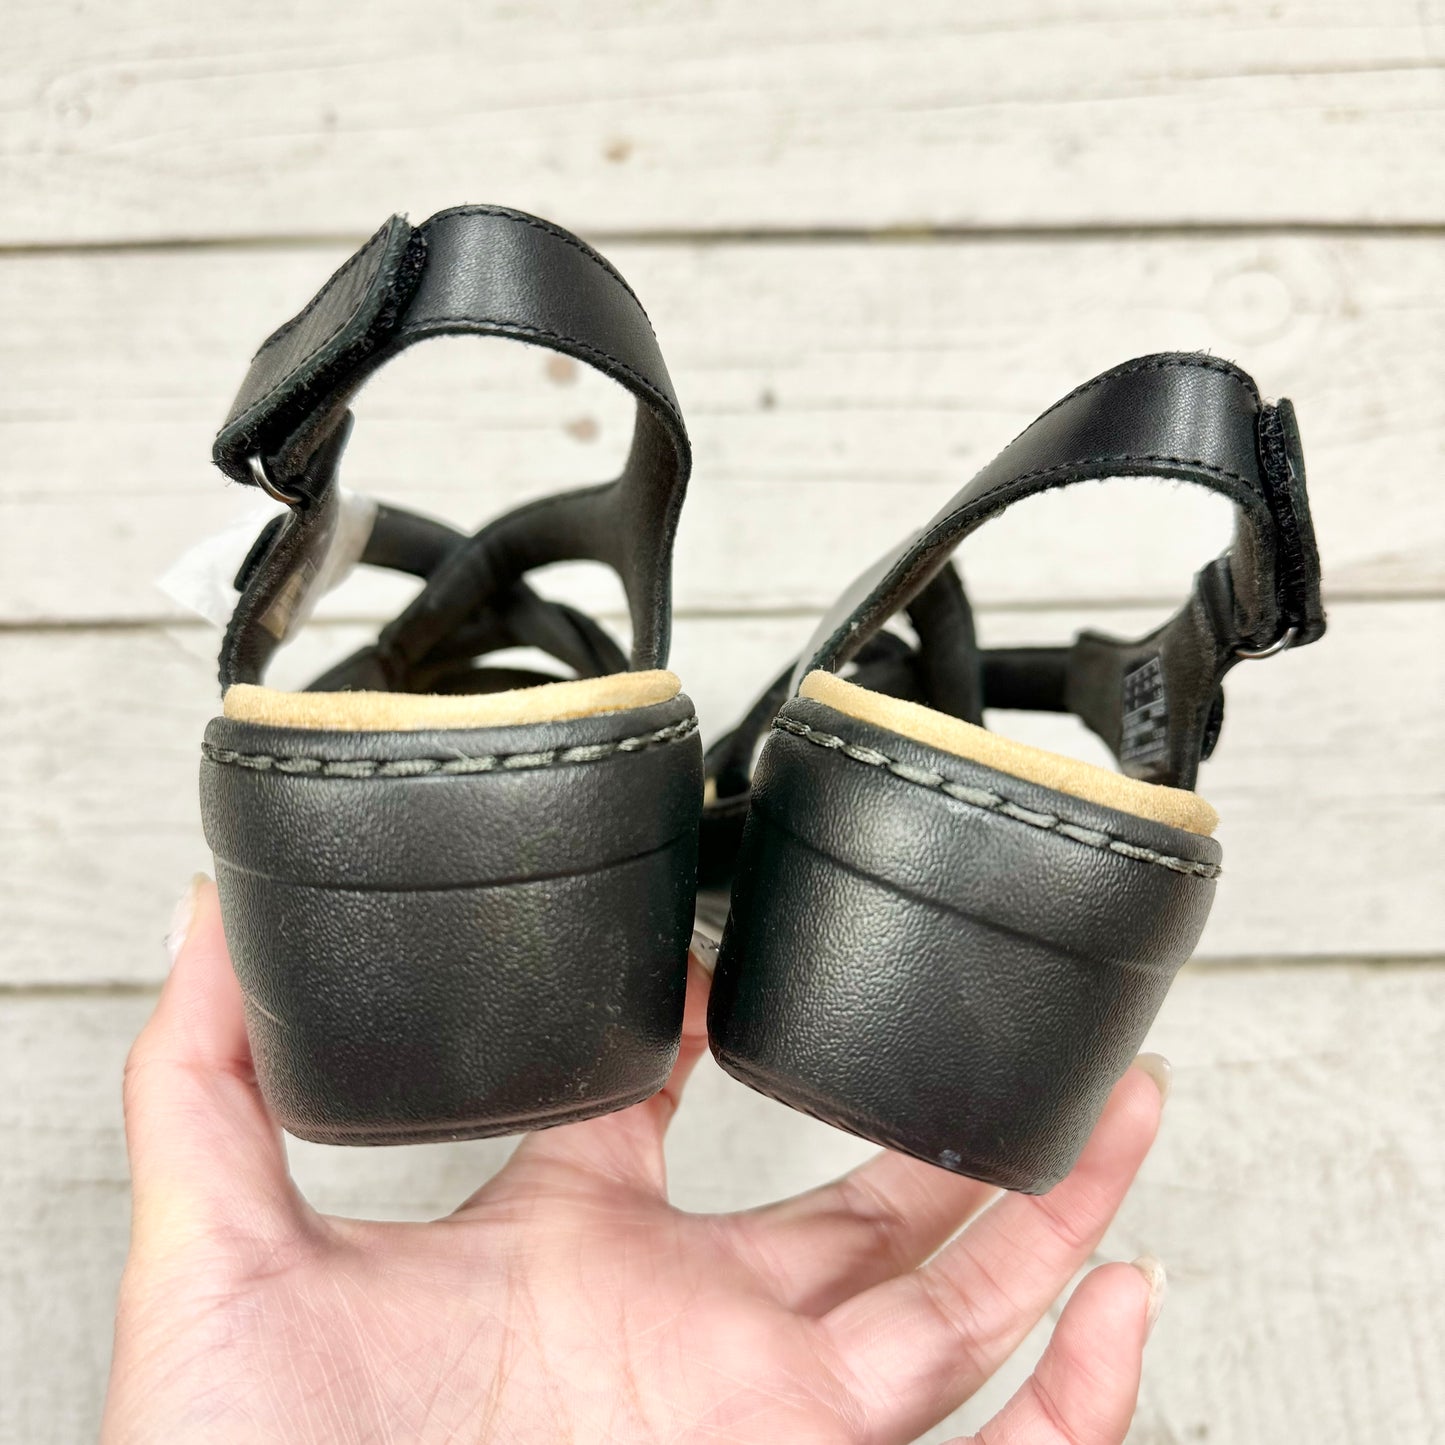 Sandals Heels Wedge By Clarks  Size: 8